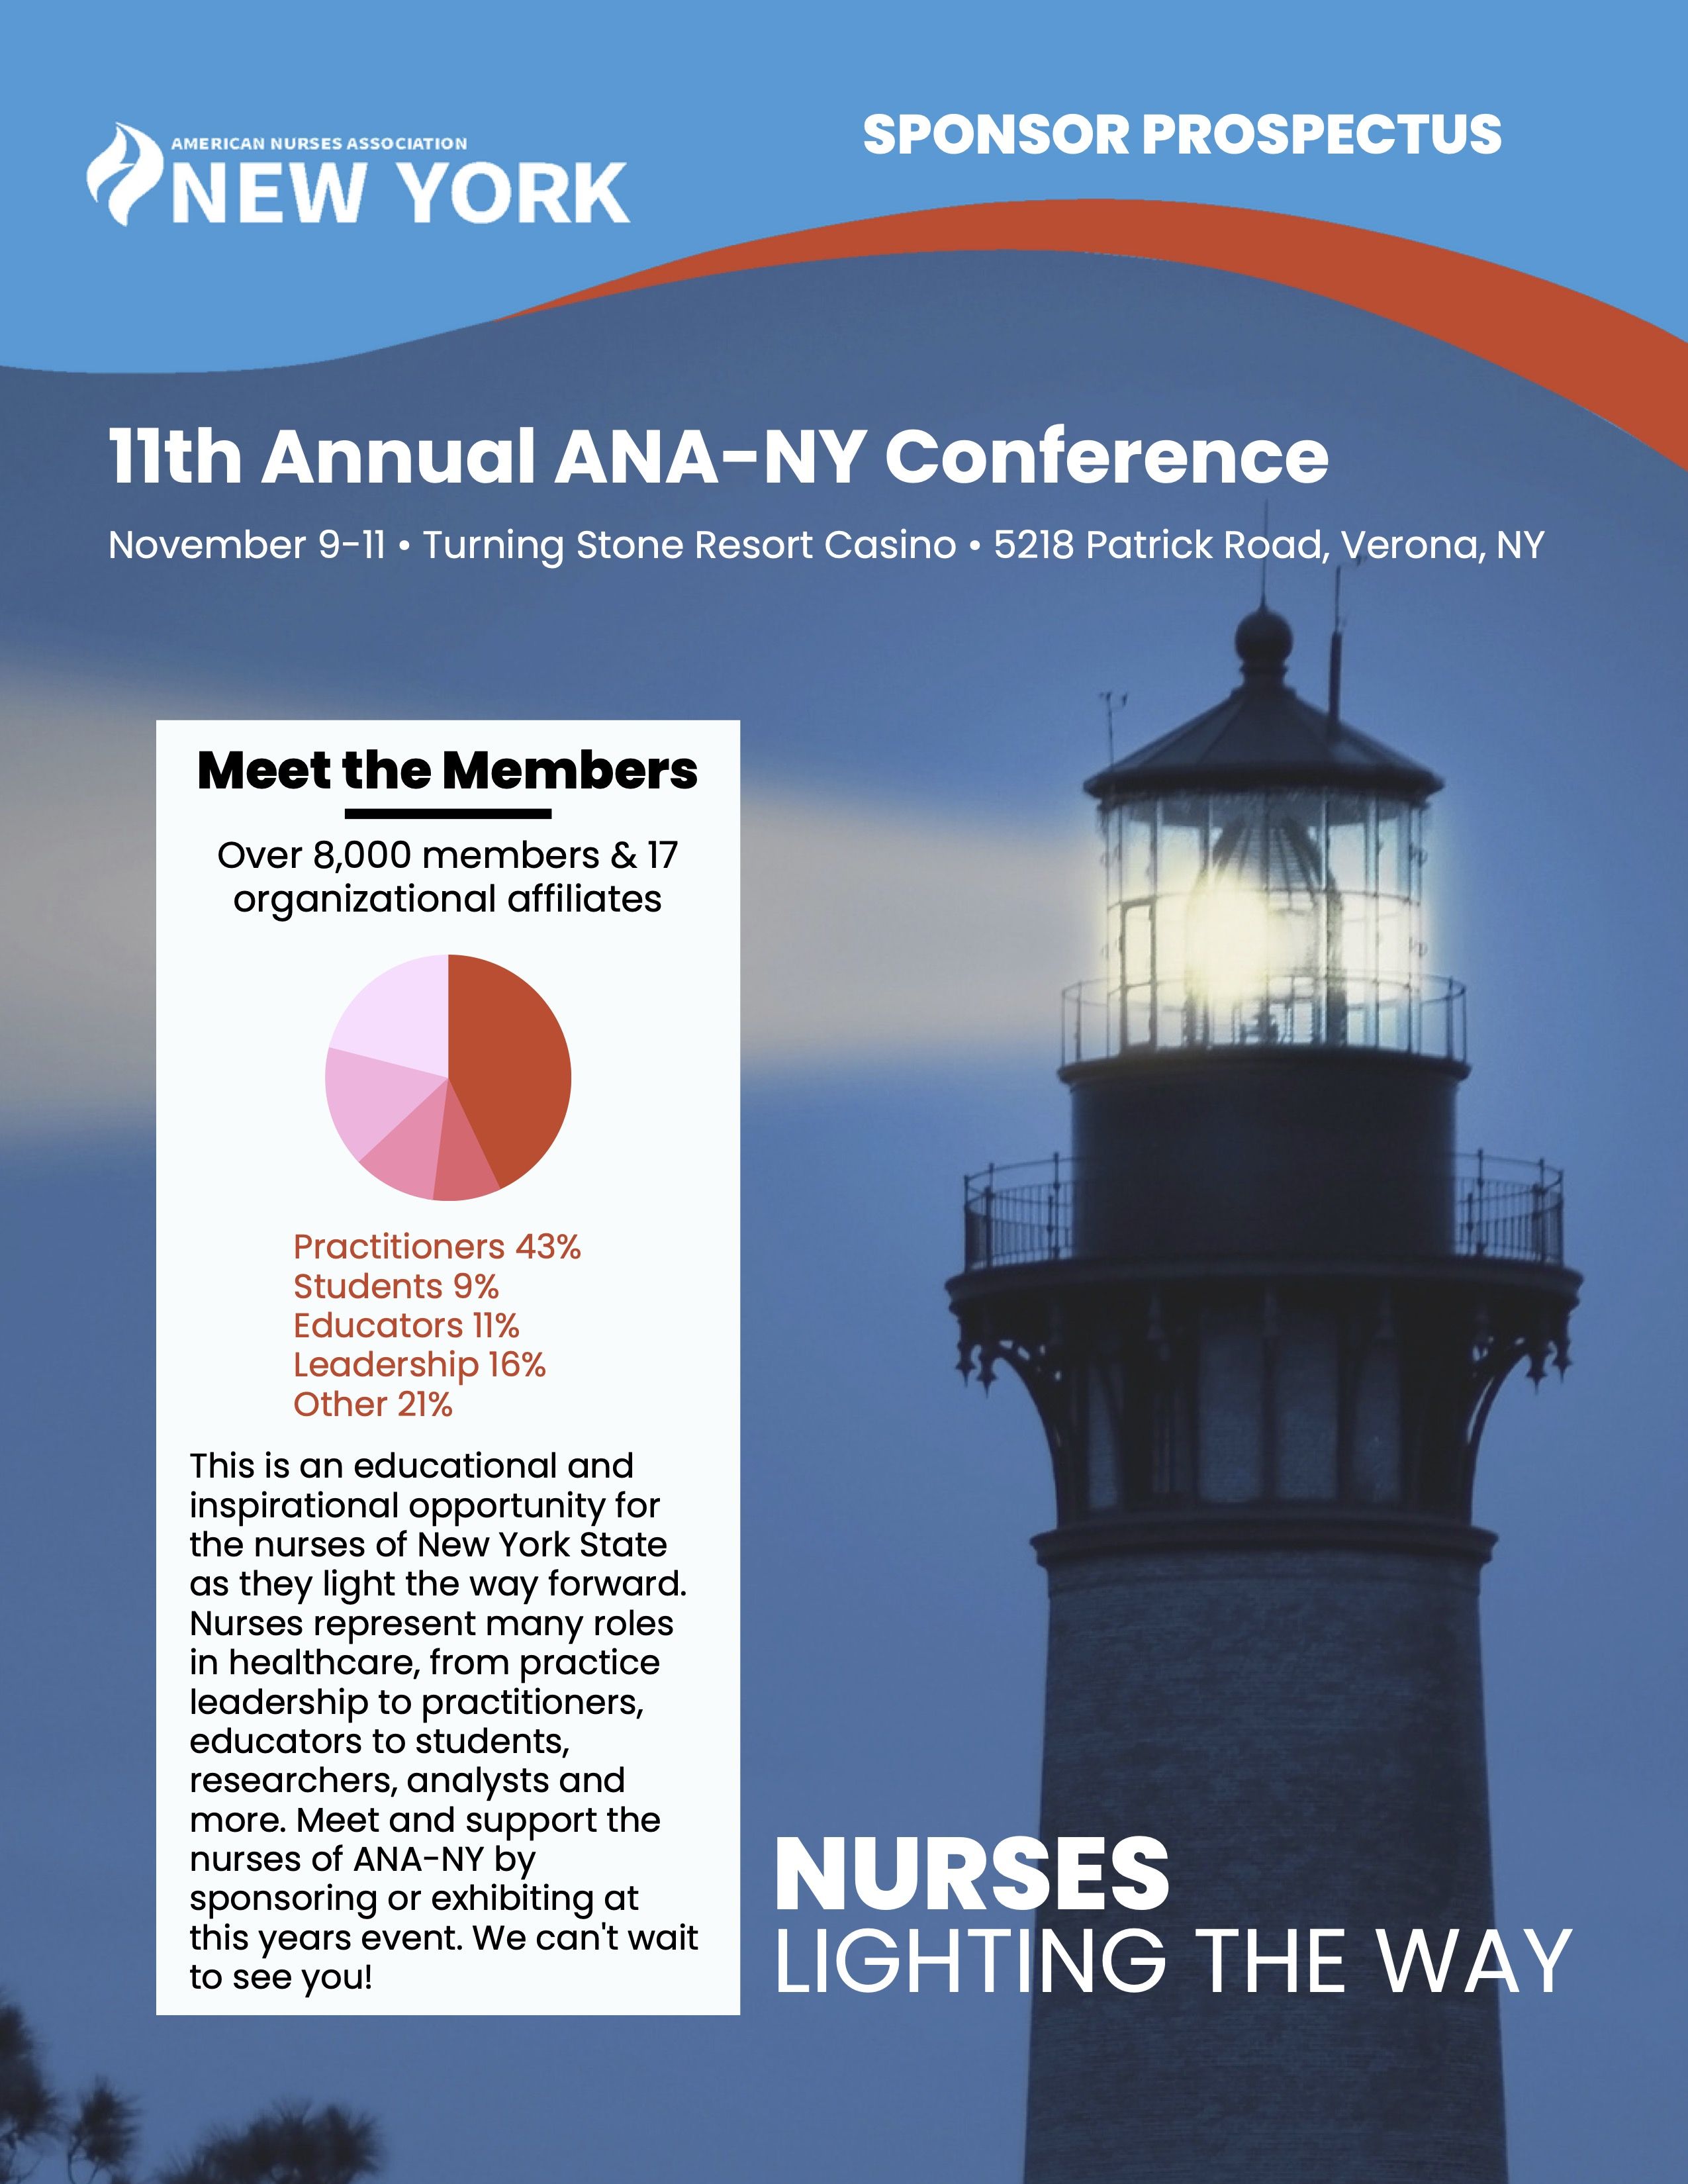 11th Annual ANA-NY Conference Sponsorships